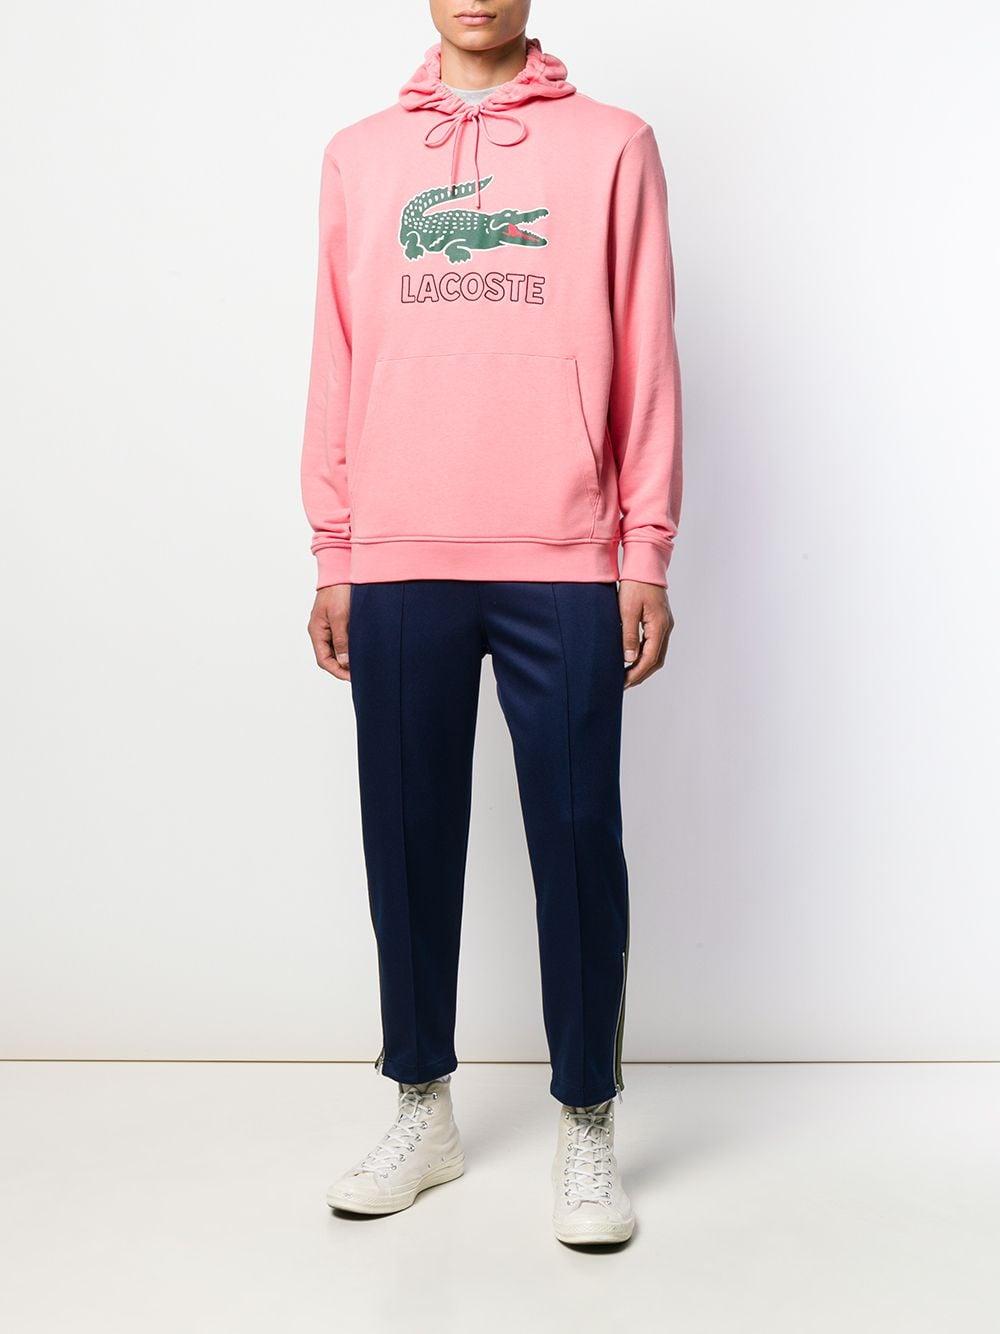 Lacoste Cotton Hoodie in Pink for Men - Lyst